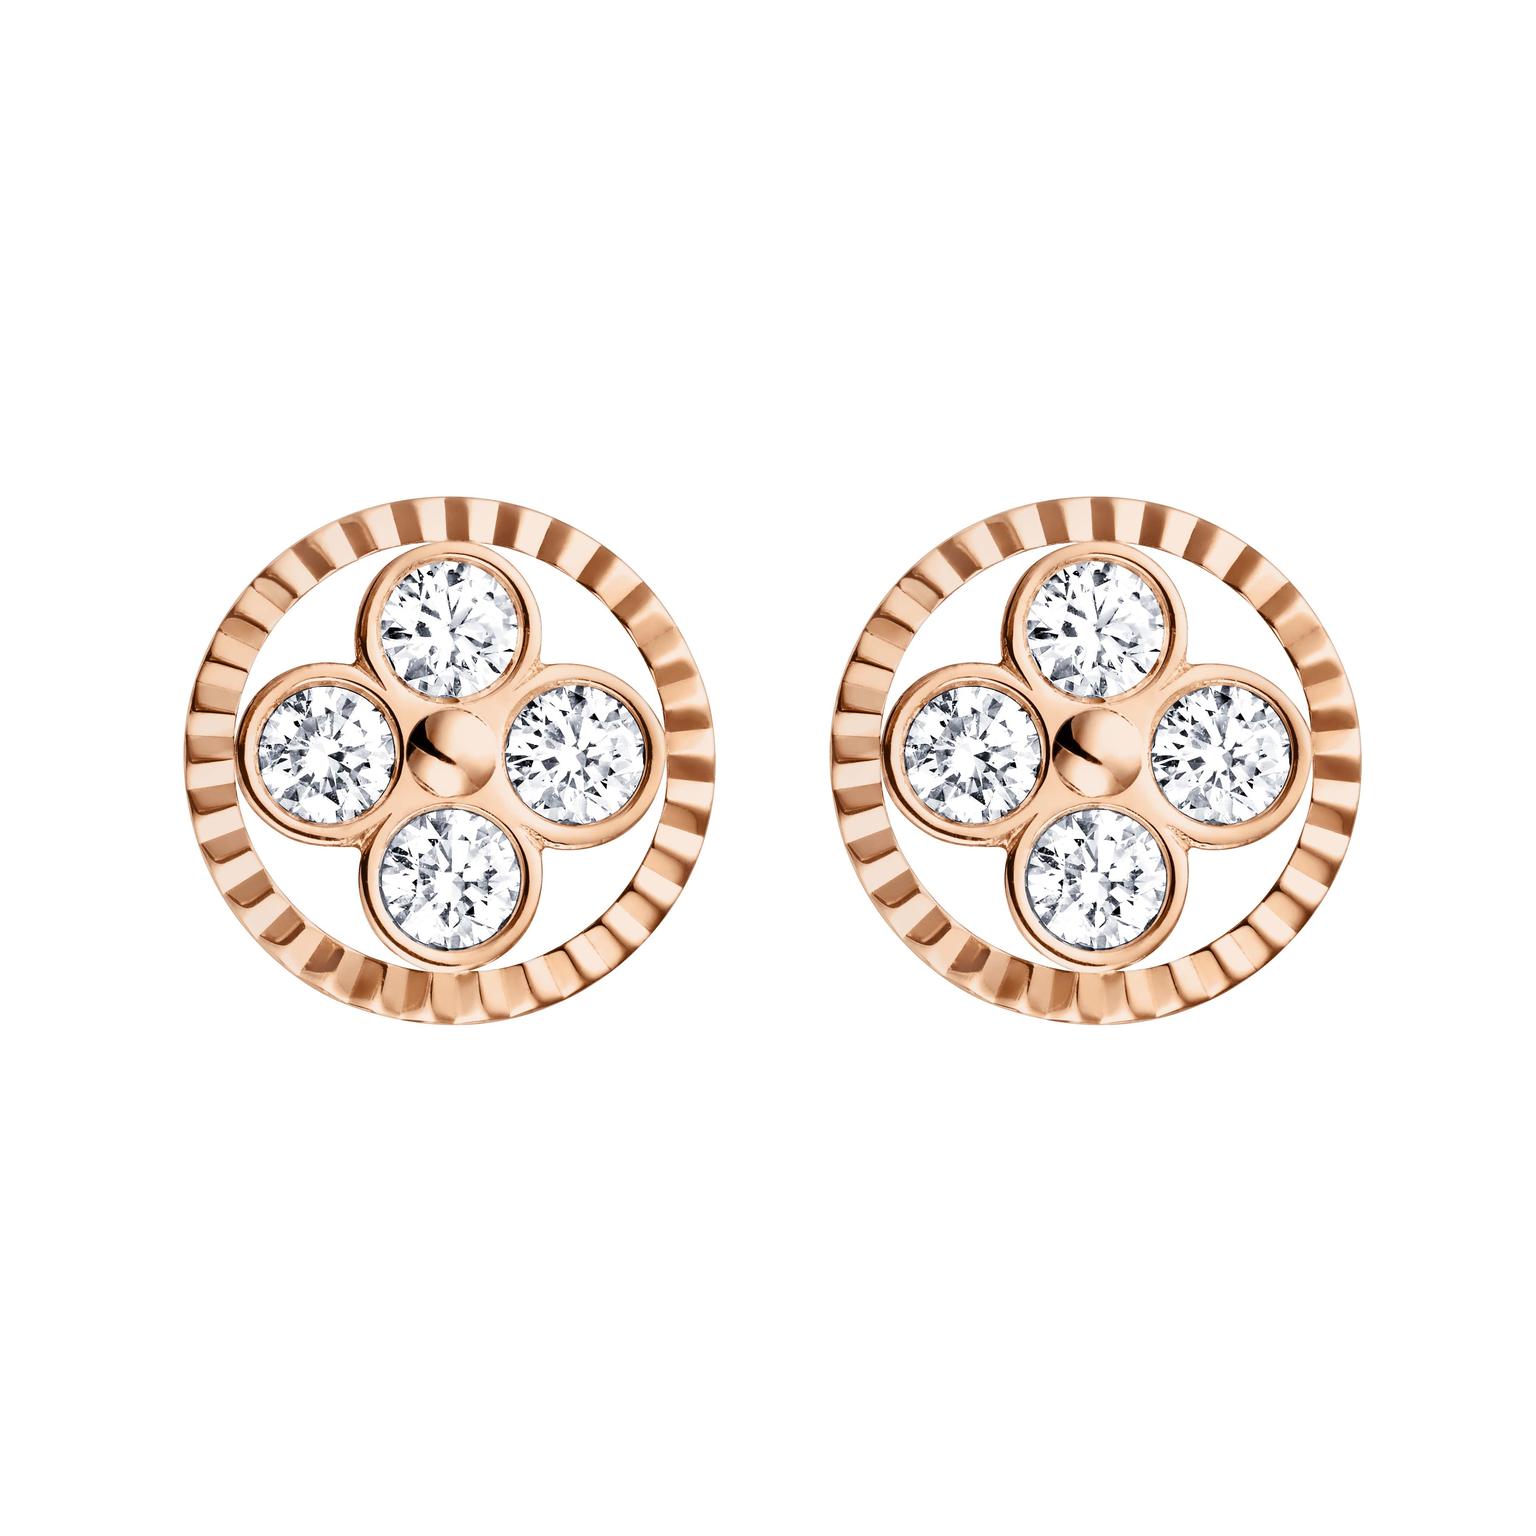 Louis Vuitton rose gold and diamond Sun earrings from the Monogram collection.